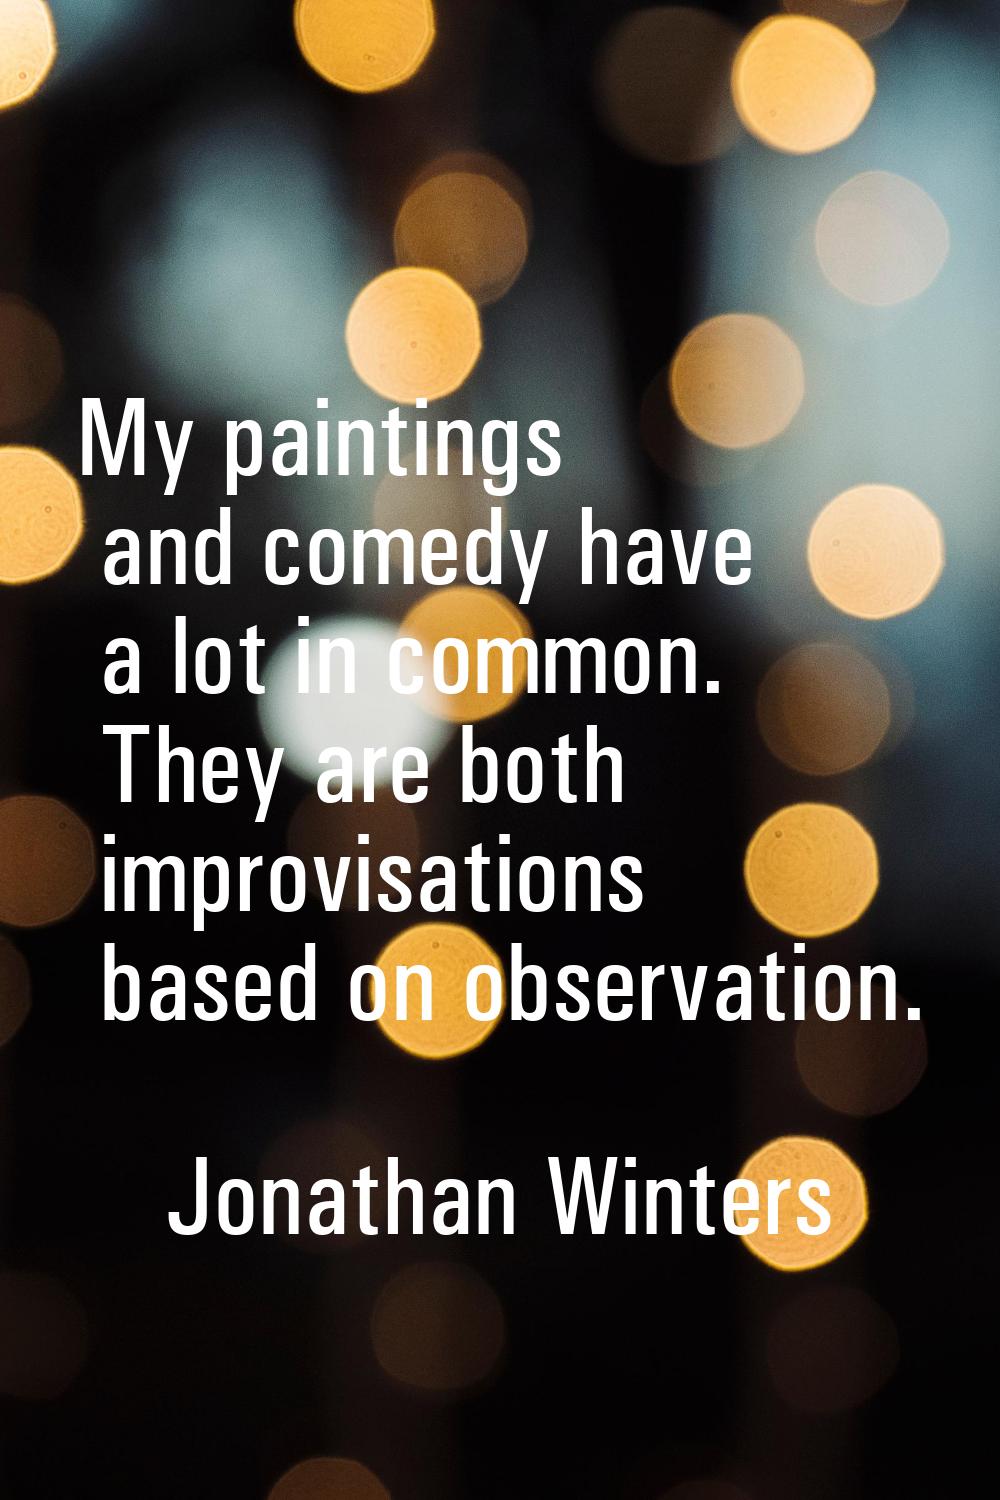 My paintings and comedy have a lot in common. They are both improvisations based on observation.